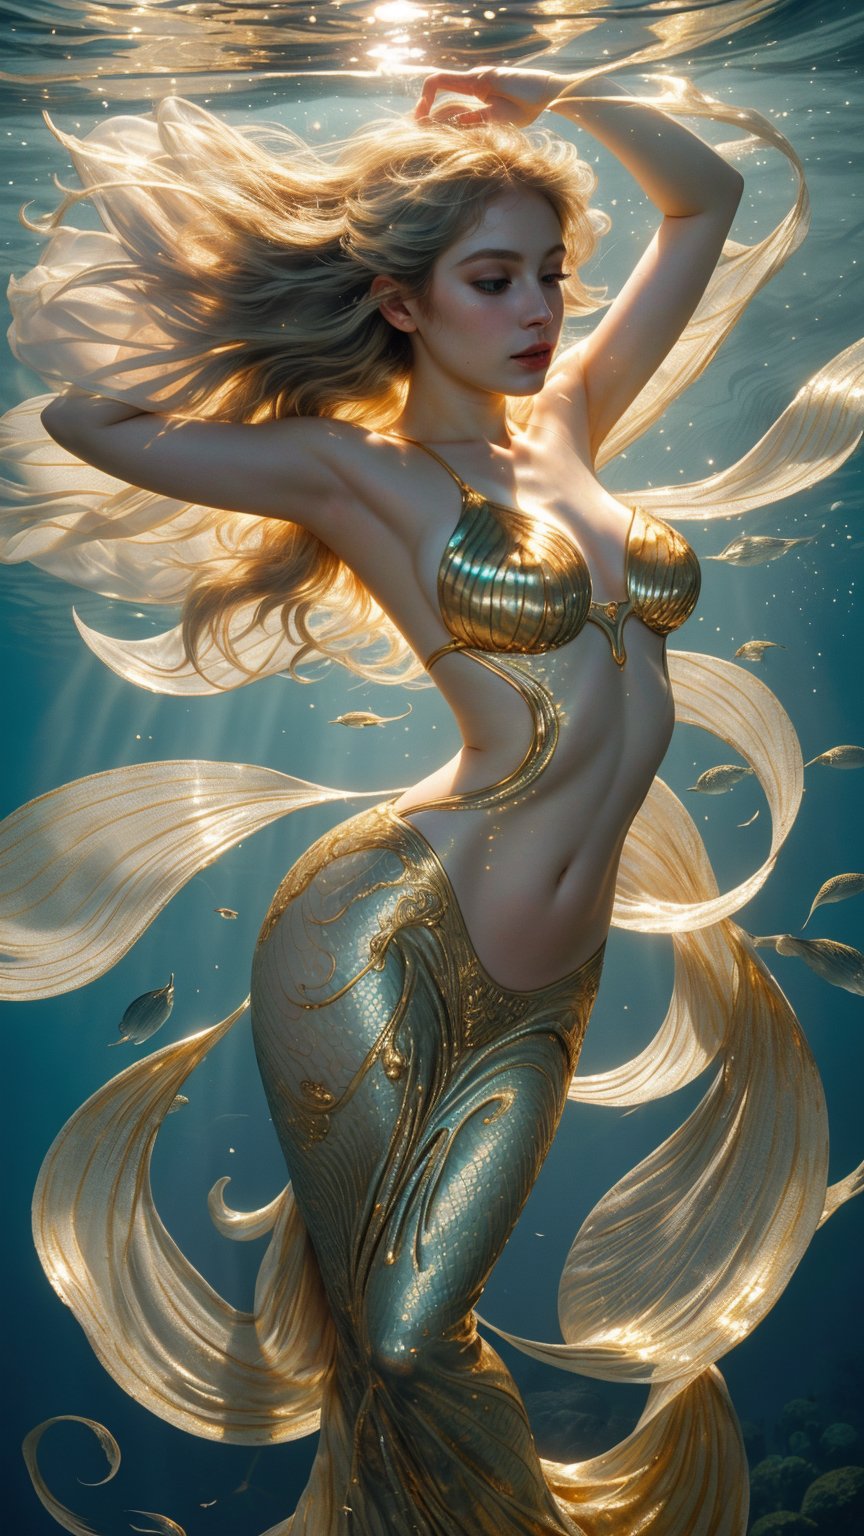 In this captivating underwater scene, a radiant mermaid emerges from worn parchment pages, her shimmering scales aglow in warm golden light. The fish-eye lens distorts the mystical atmosphere, rippling like ocean waves as she breaks free from book constraints. She poses with playful abandon: tail fluke fluttering like a fan, blue eyes sparkling with mischief. Soft focus on her features, with subtle texture and highlights that seem to shift like ripples on water. Her pale skin glistens with an ethereal glow, as if kissed by the golden light.,nami \(one piece\)